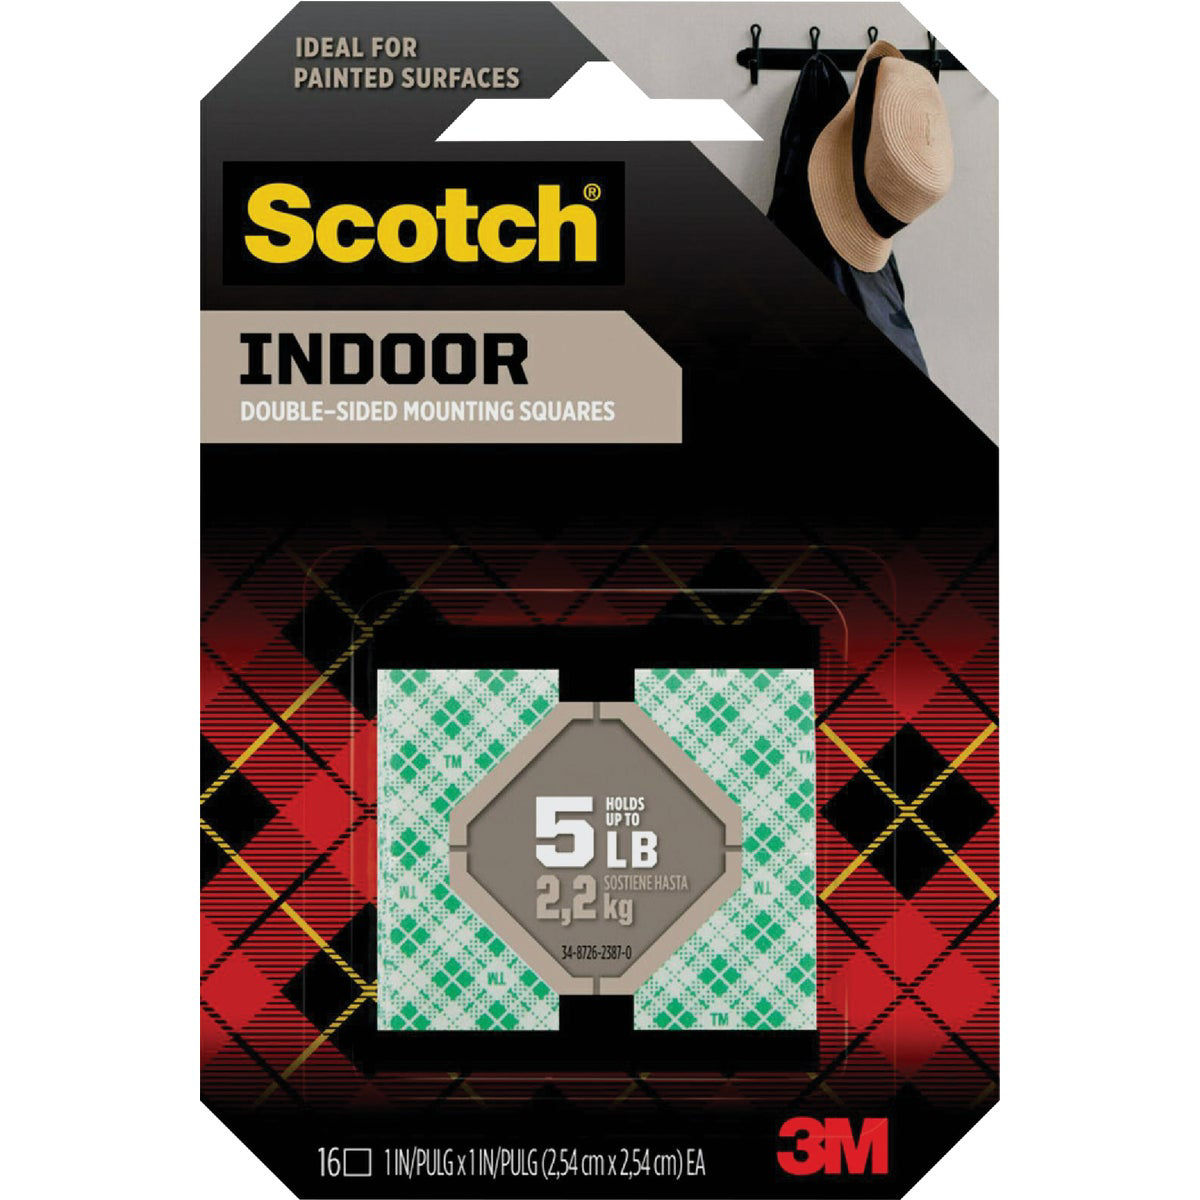 Scotch Restickable Mounting Squares, 1 In. x 1 In., 18 Squares - Malone  Lumber Do it Best